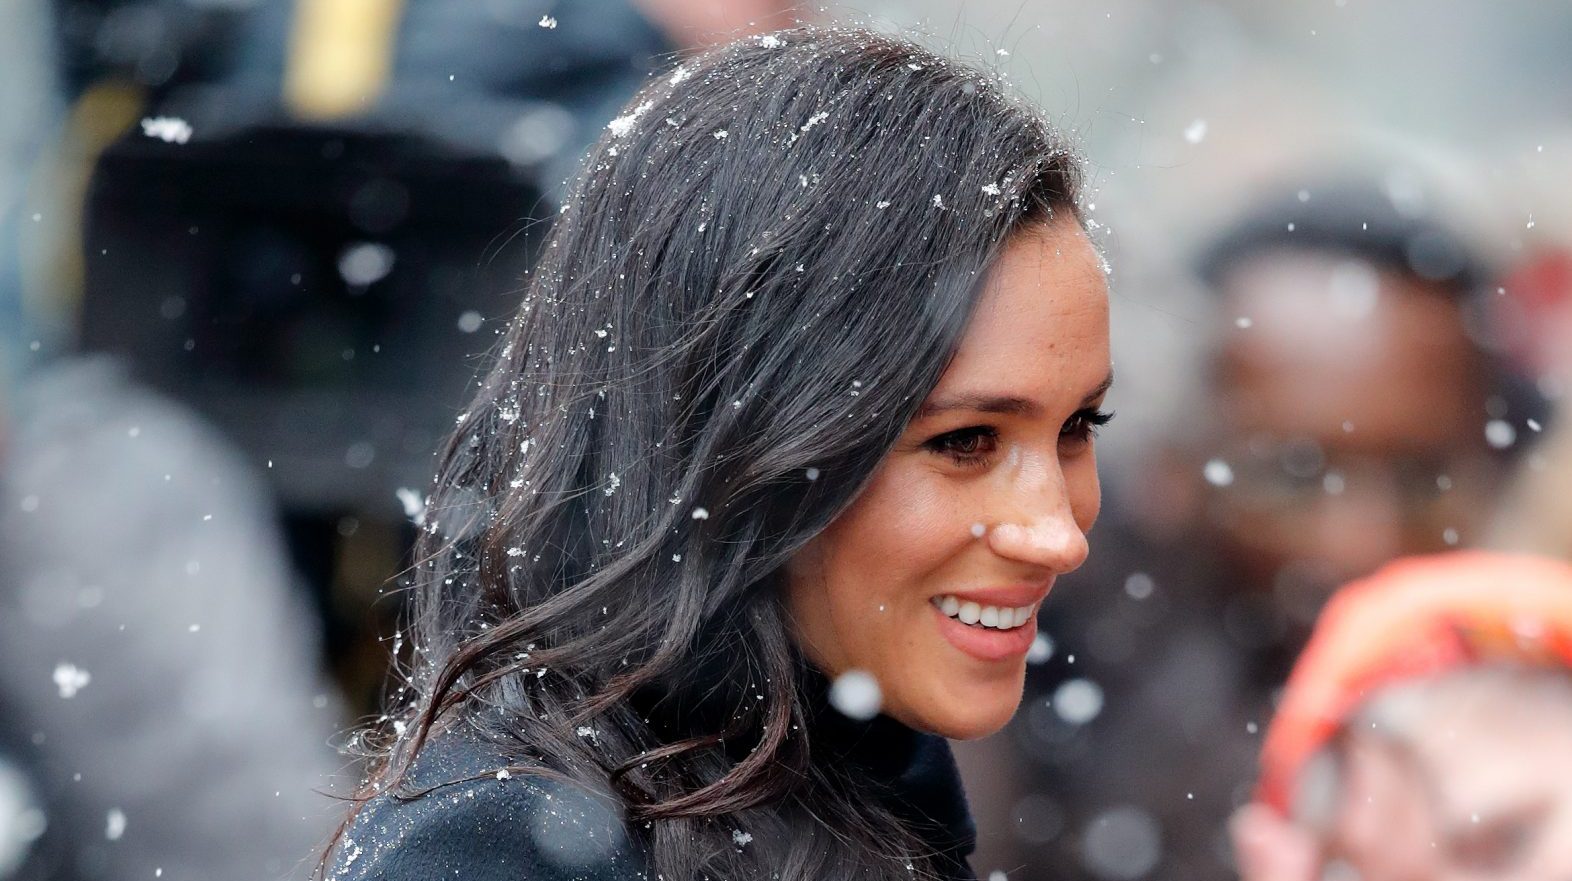 Meghan Markle's baby shower goodie bags contents revealed